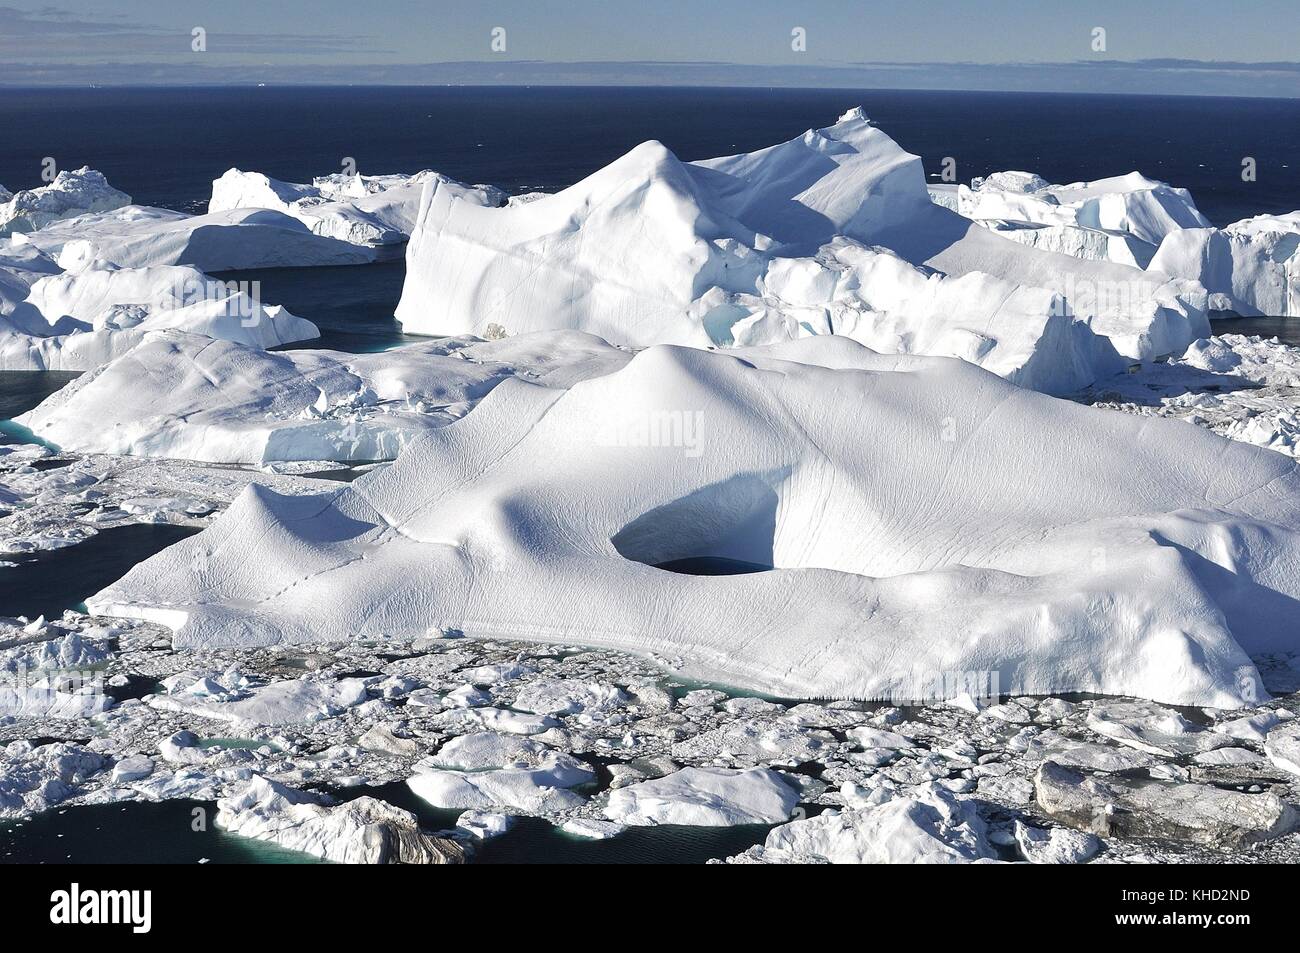 ICEBERGS ABOUT TO CALVE INTO DISKO BAY FROM ILULISSAT GLACIER Stock Photo